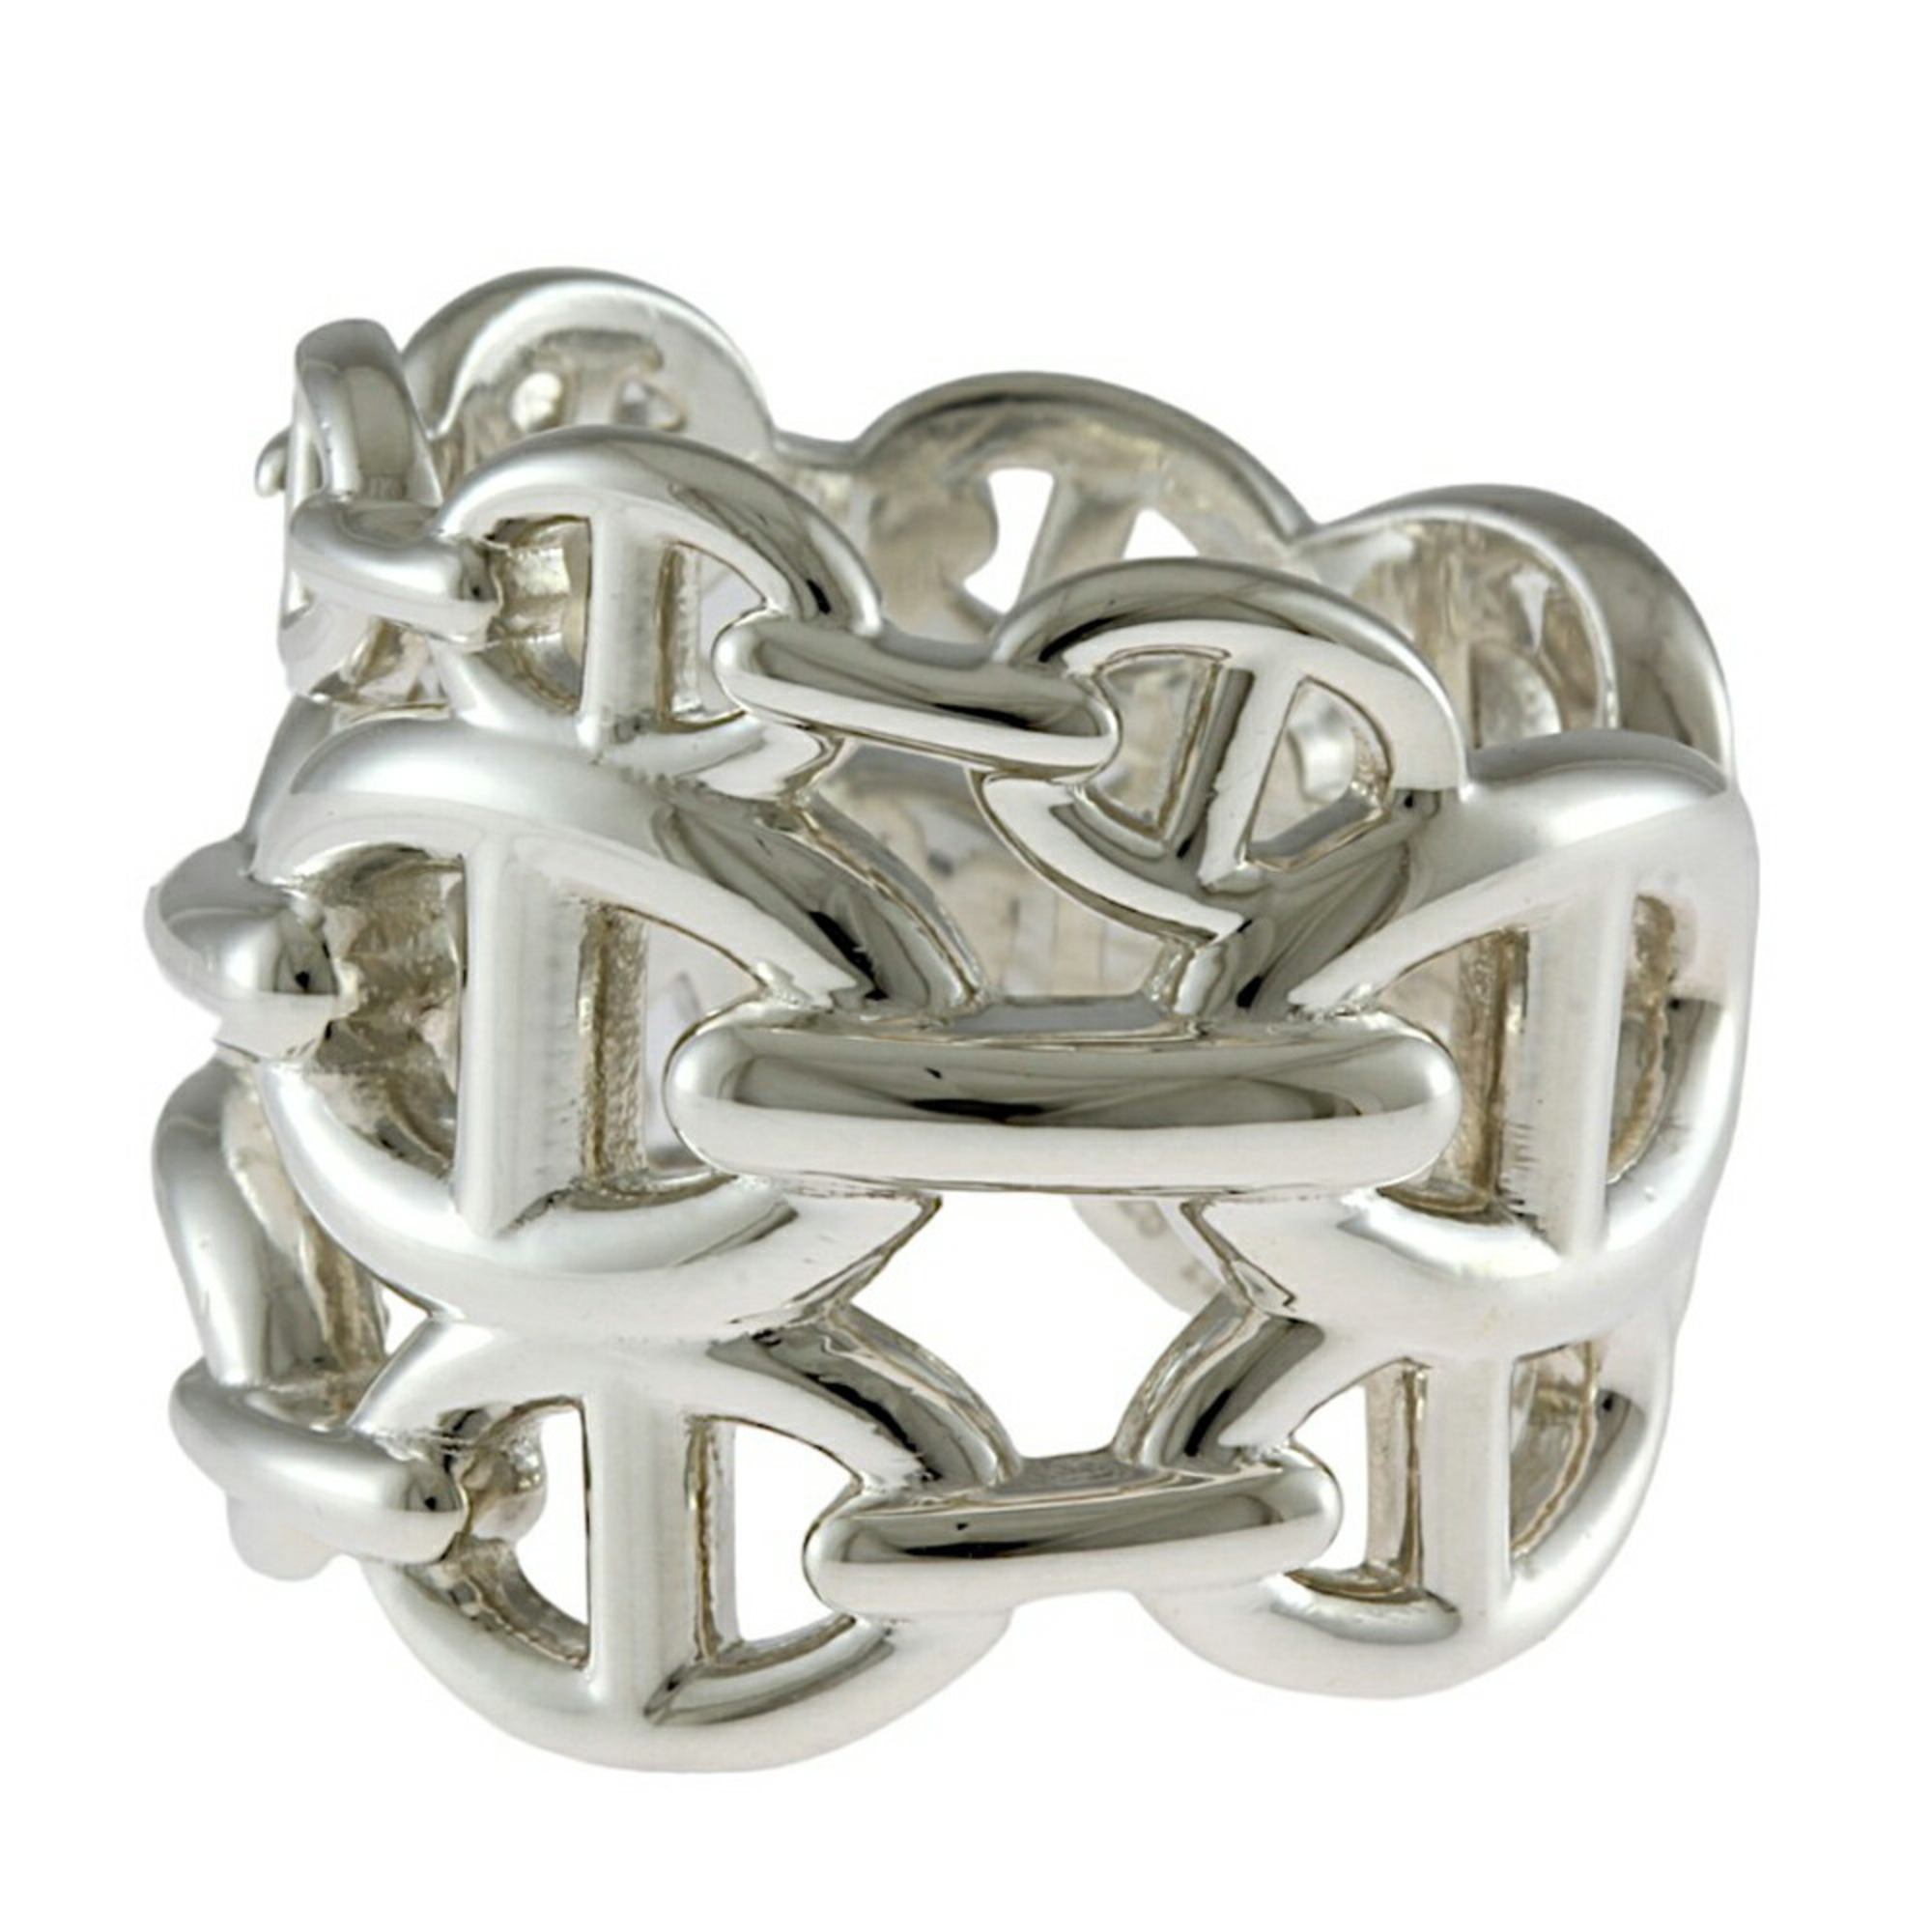 Hermes Chaine d'Ancre Anchaine Ring, Size 13, Silver 925, Women's, HERMES